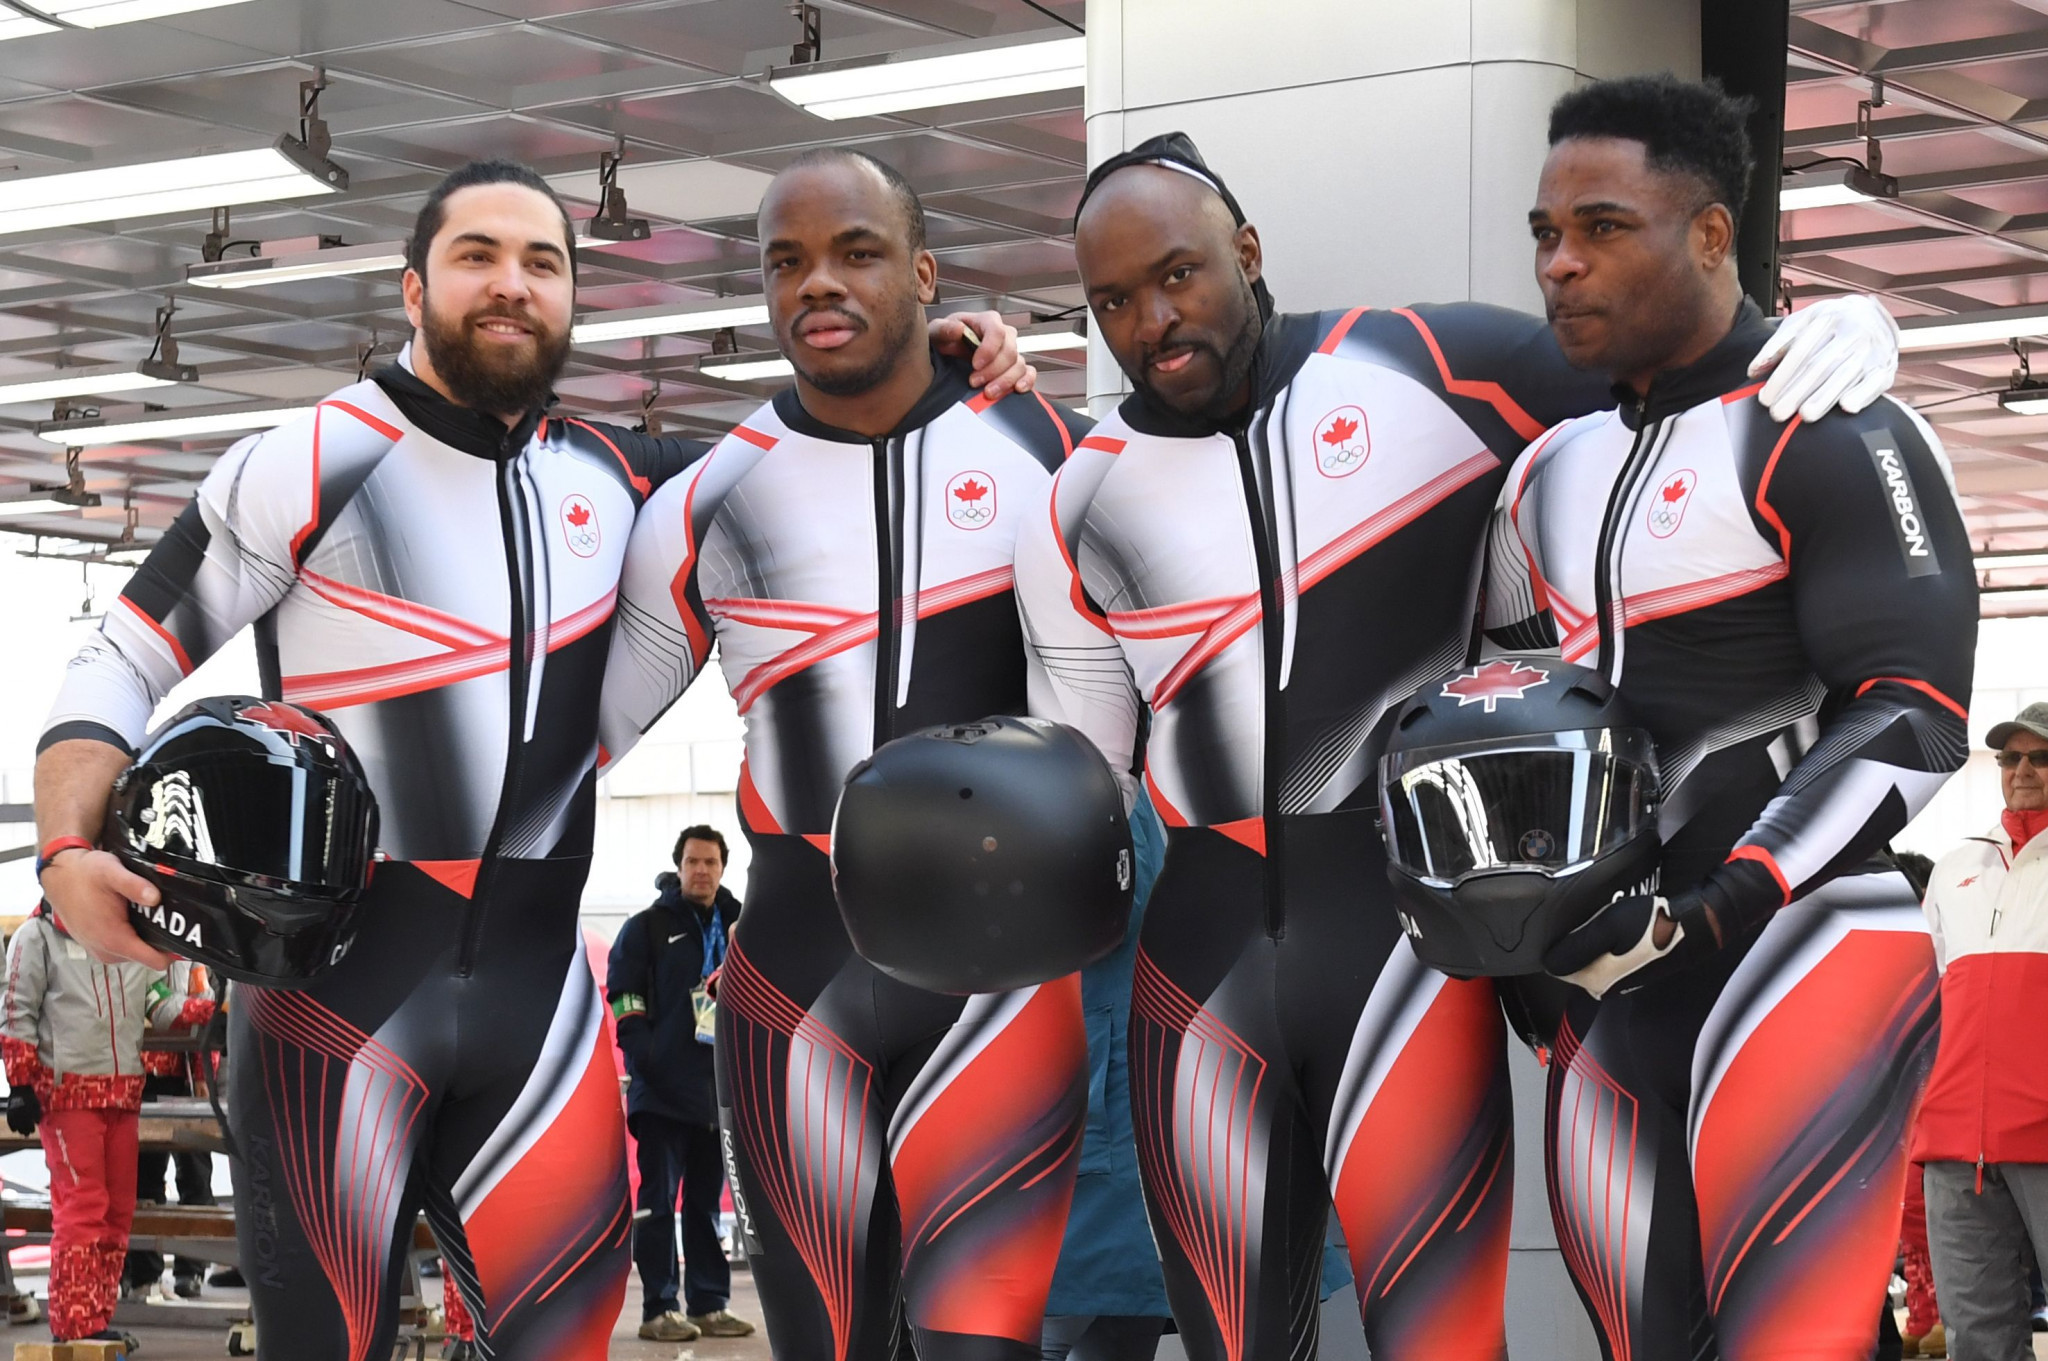 Three-times Canadian Olympic bobsleigh athlete Wright announces retirement